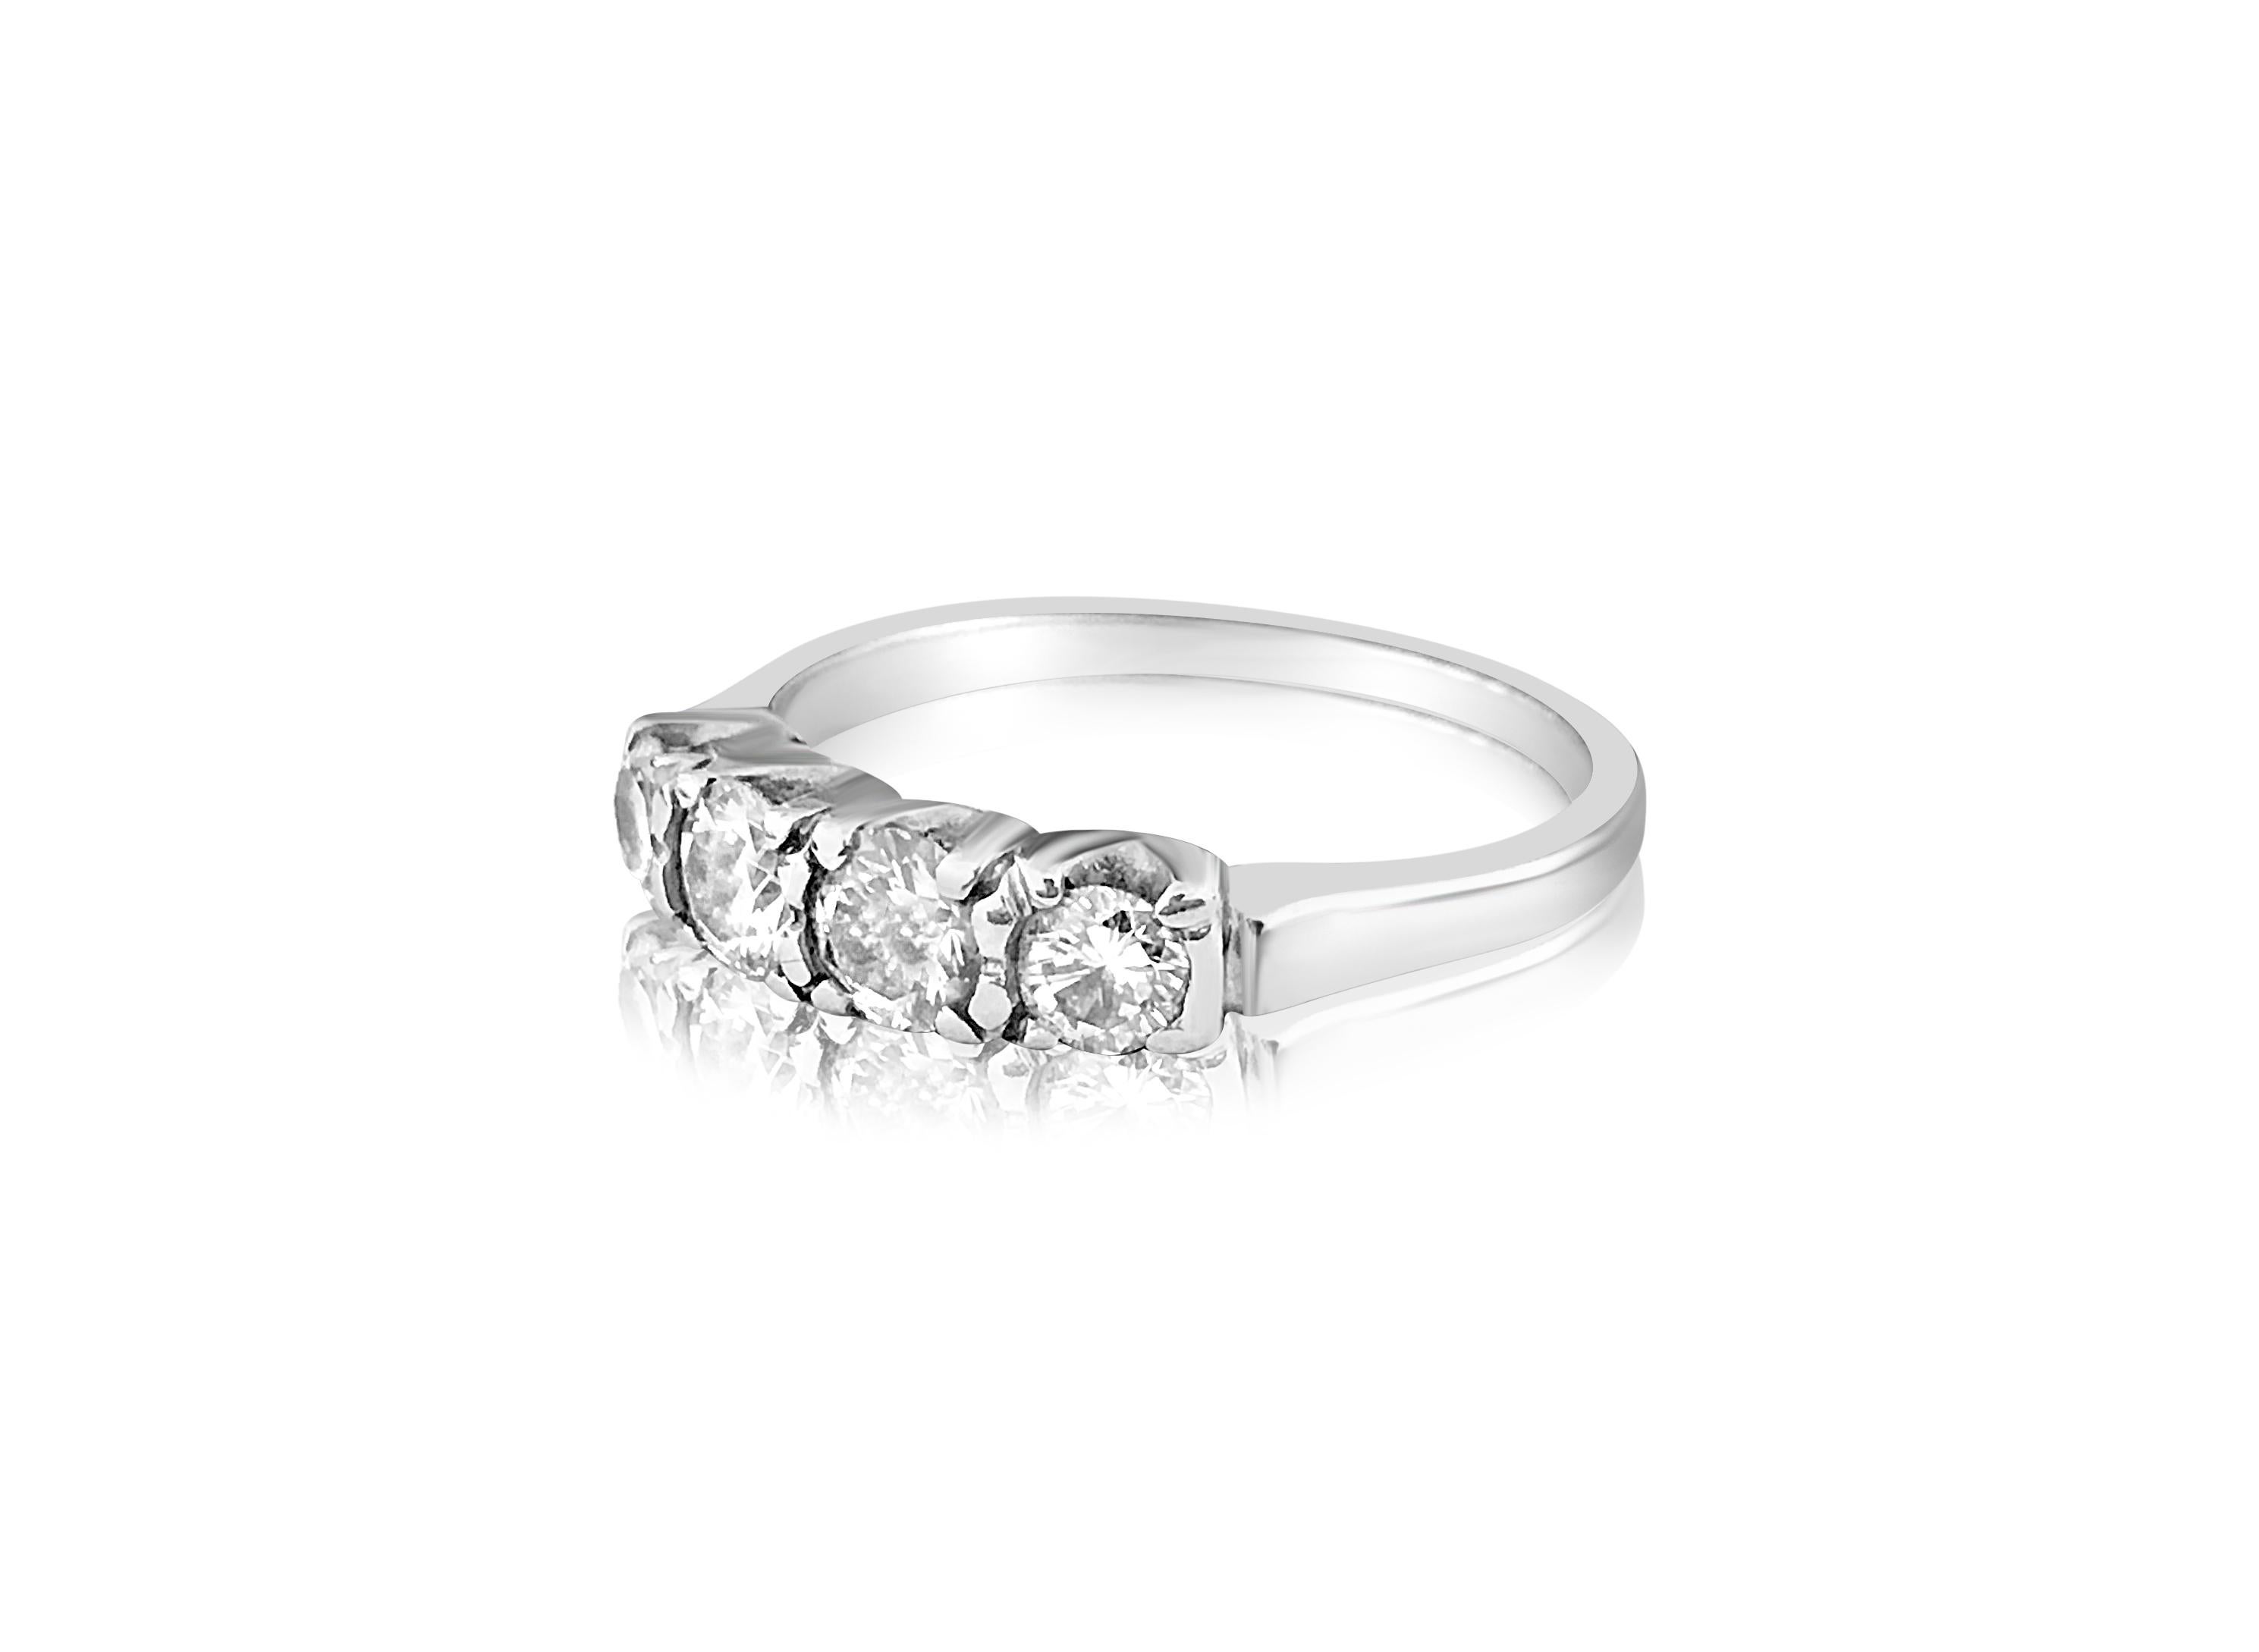 Metal: 14K white gold. 
Total carat weight of all diamonds: 1.00 carat. VS clarity and G color. Round brilliant cut diamonds in prongs. All diamonds are 100% natural earth mined. Four stone diamond wedding ring. Nice luster and shine. Womens